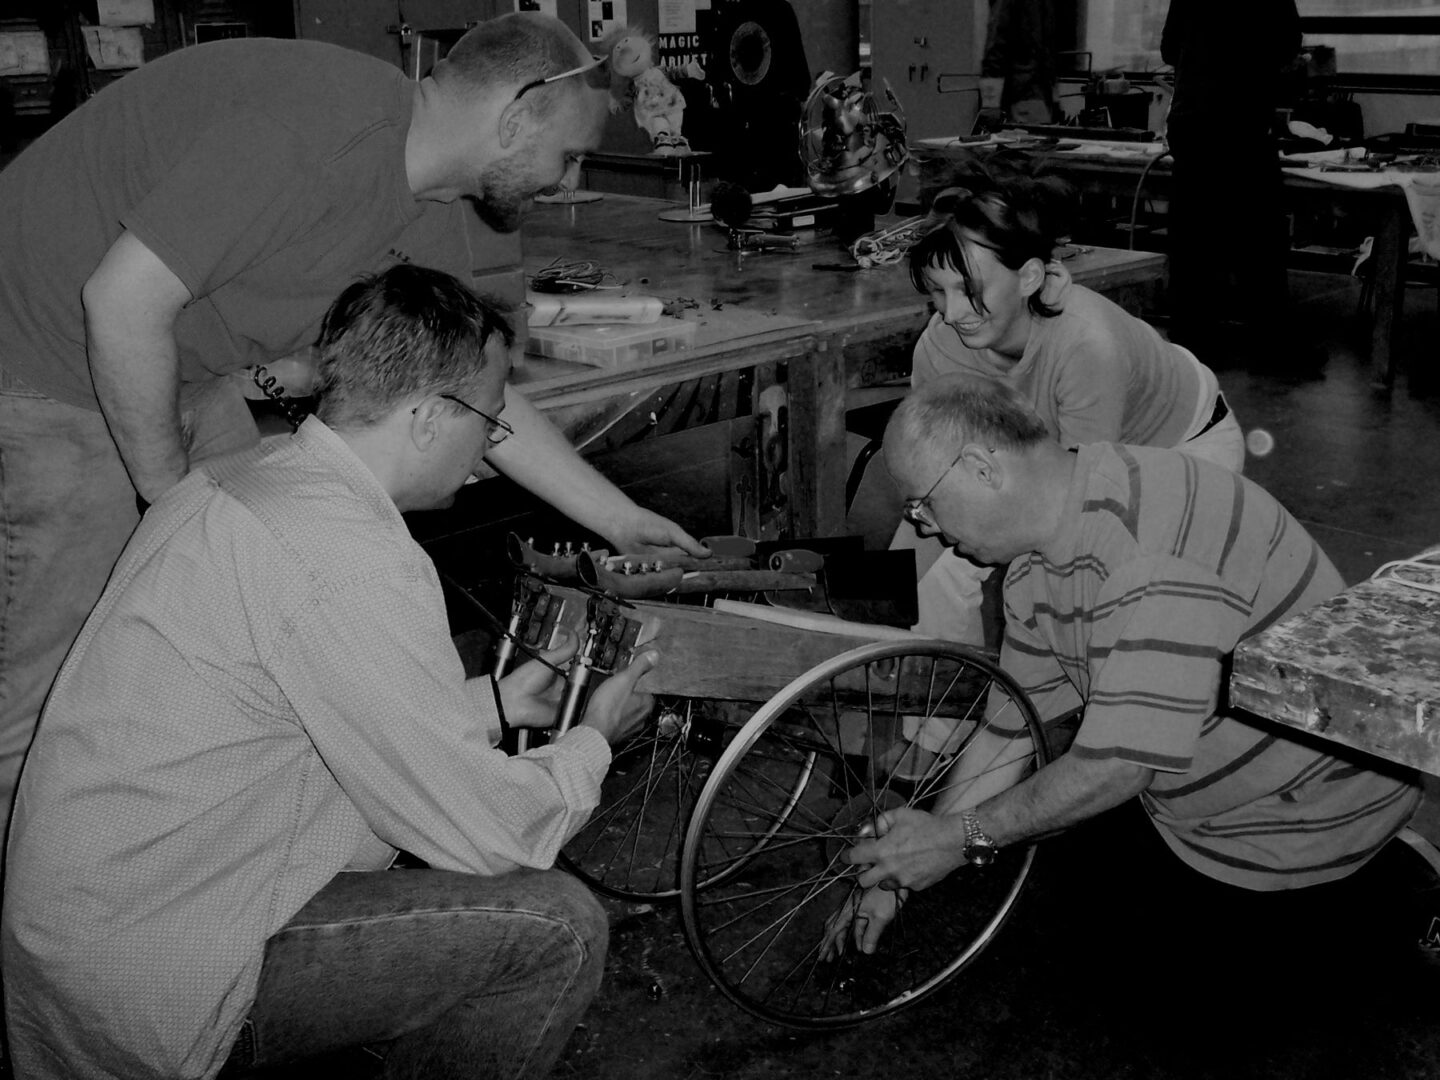 A group of people participating in Ira Sherman Workshops, working on a wheel chair.